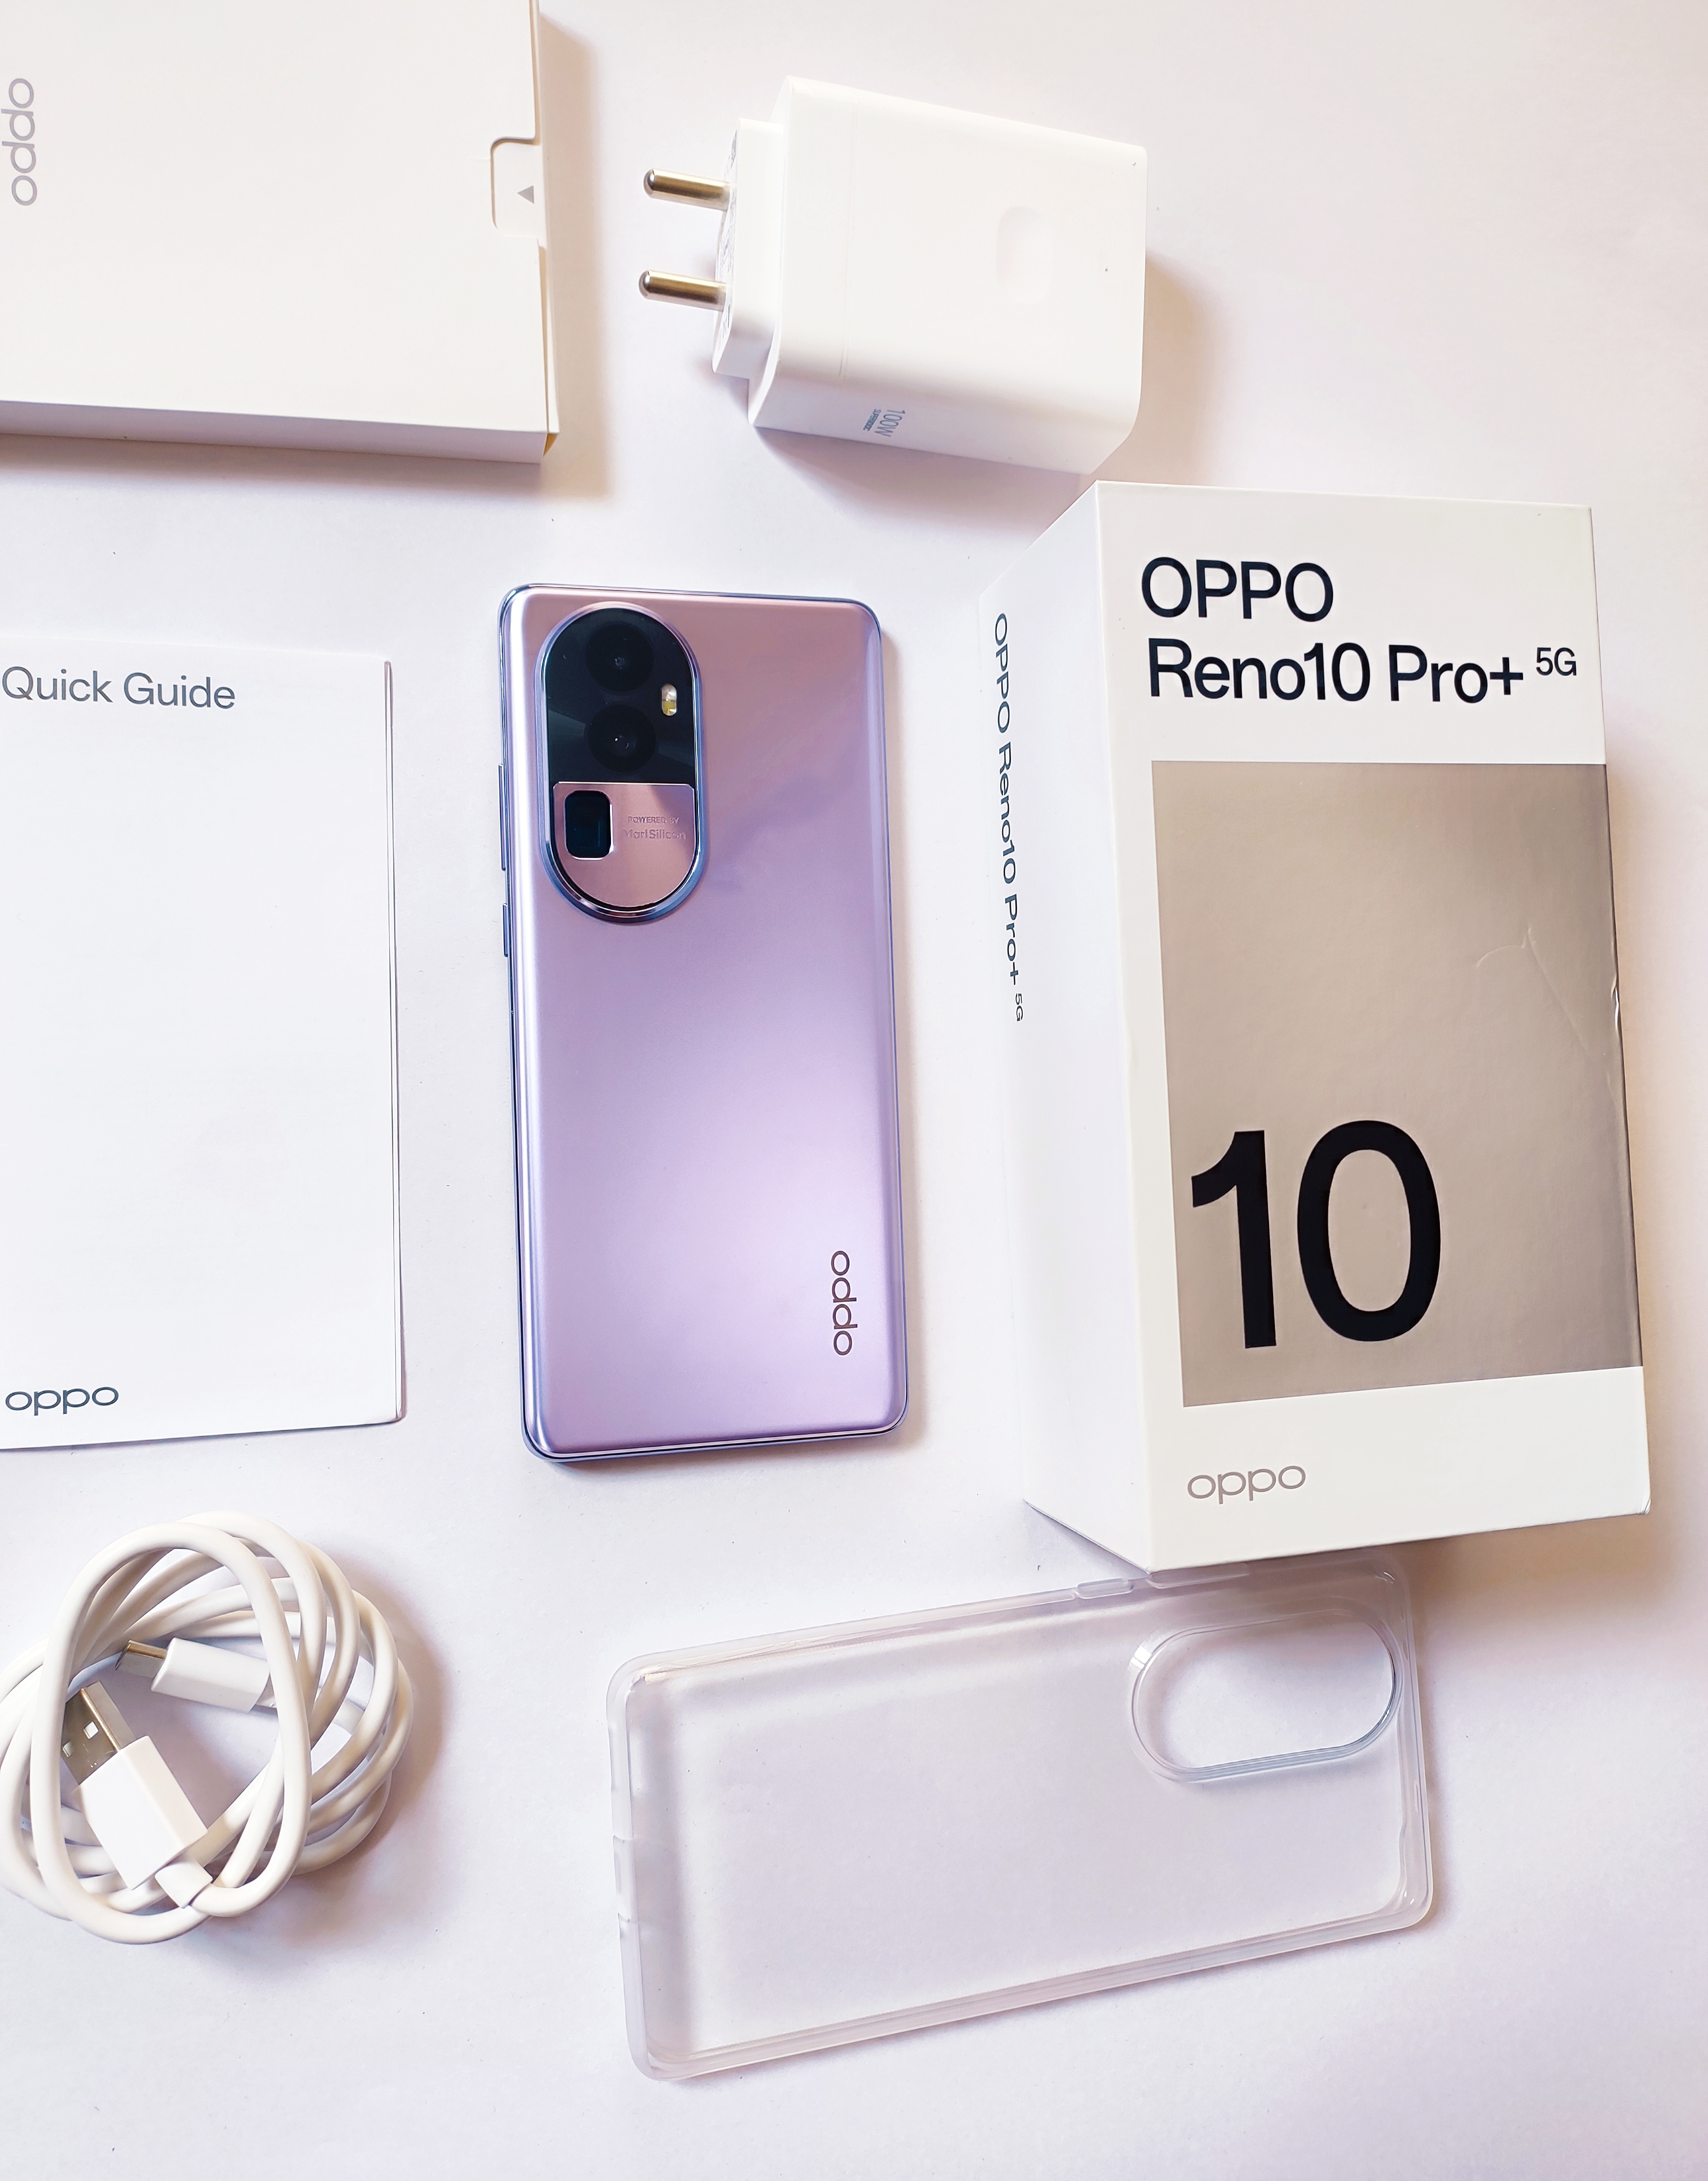 Unboxing of the Beast OPPO Reno 10 Series. features and specifications